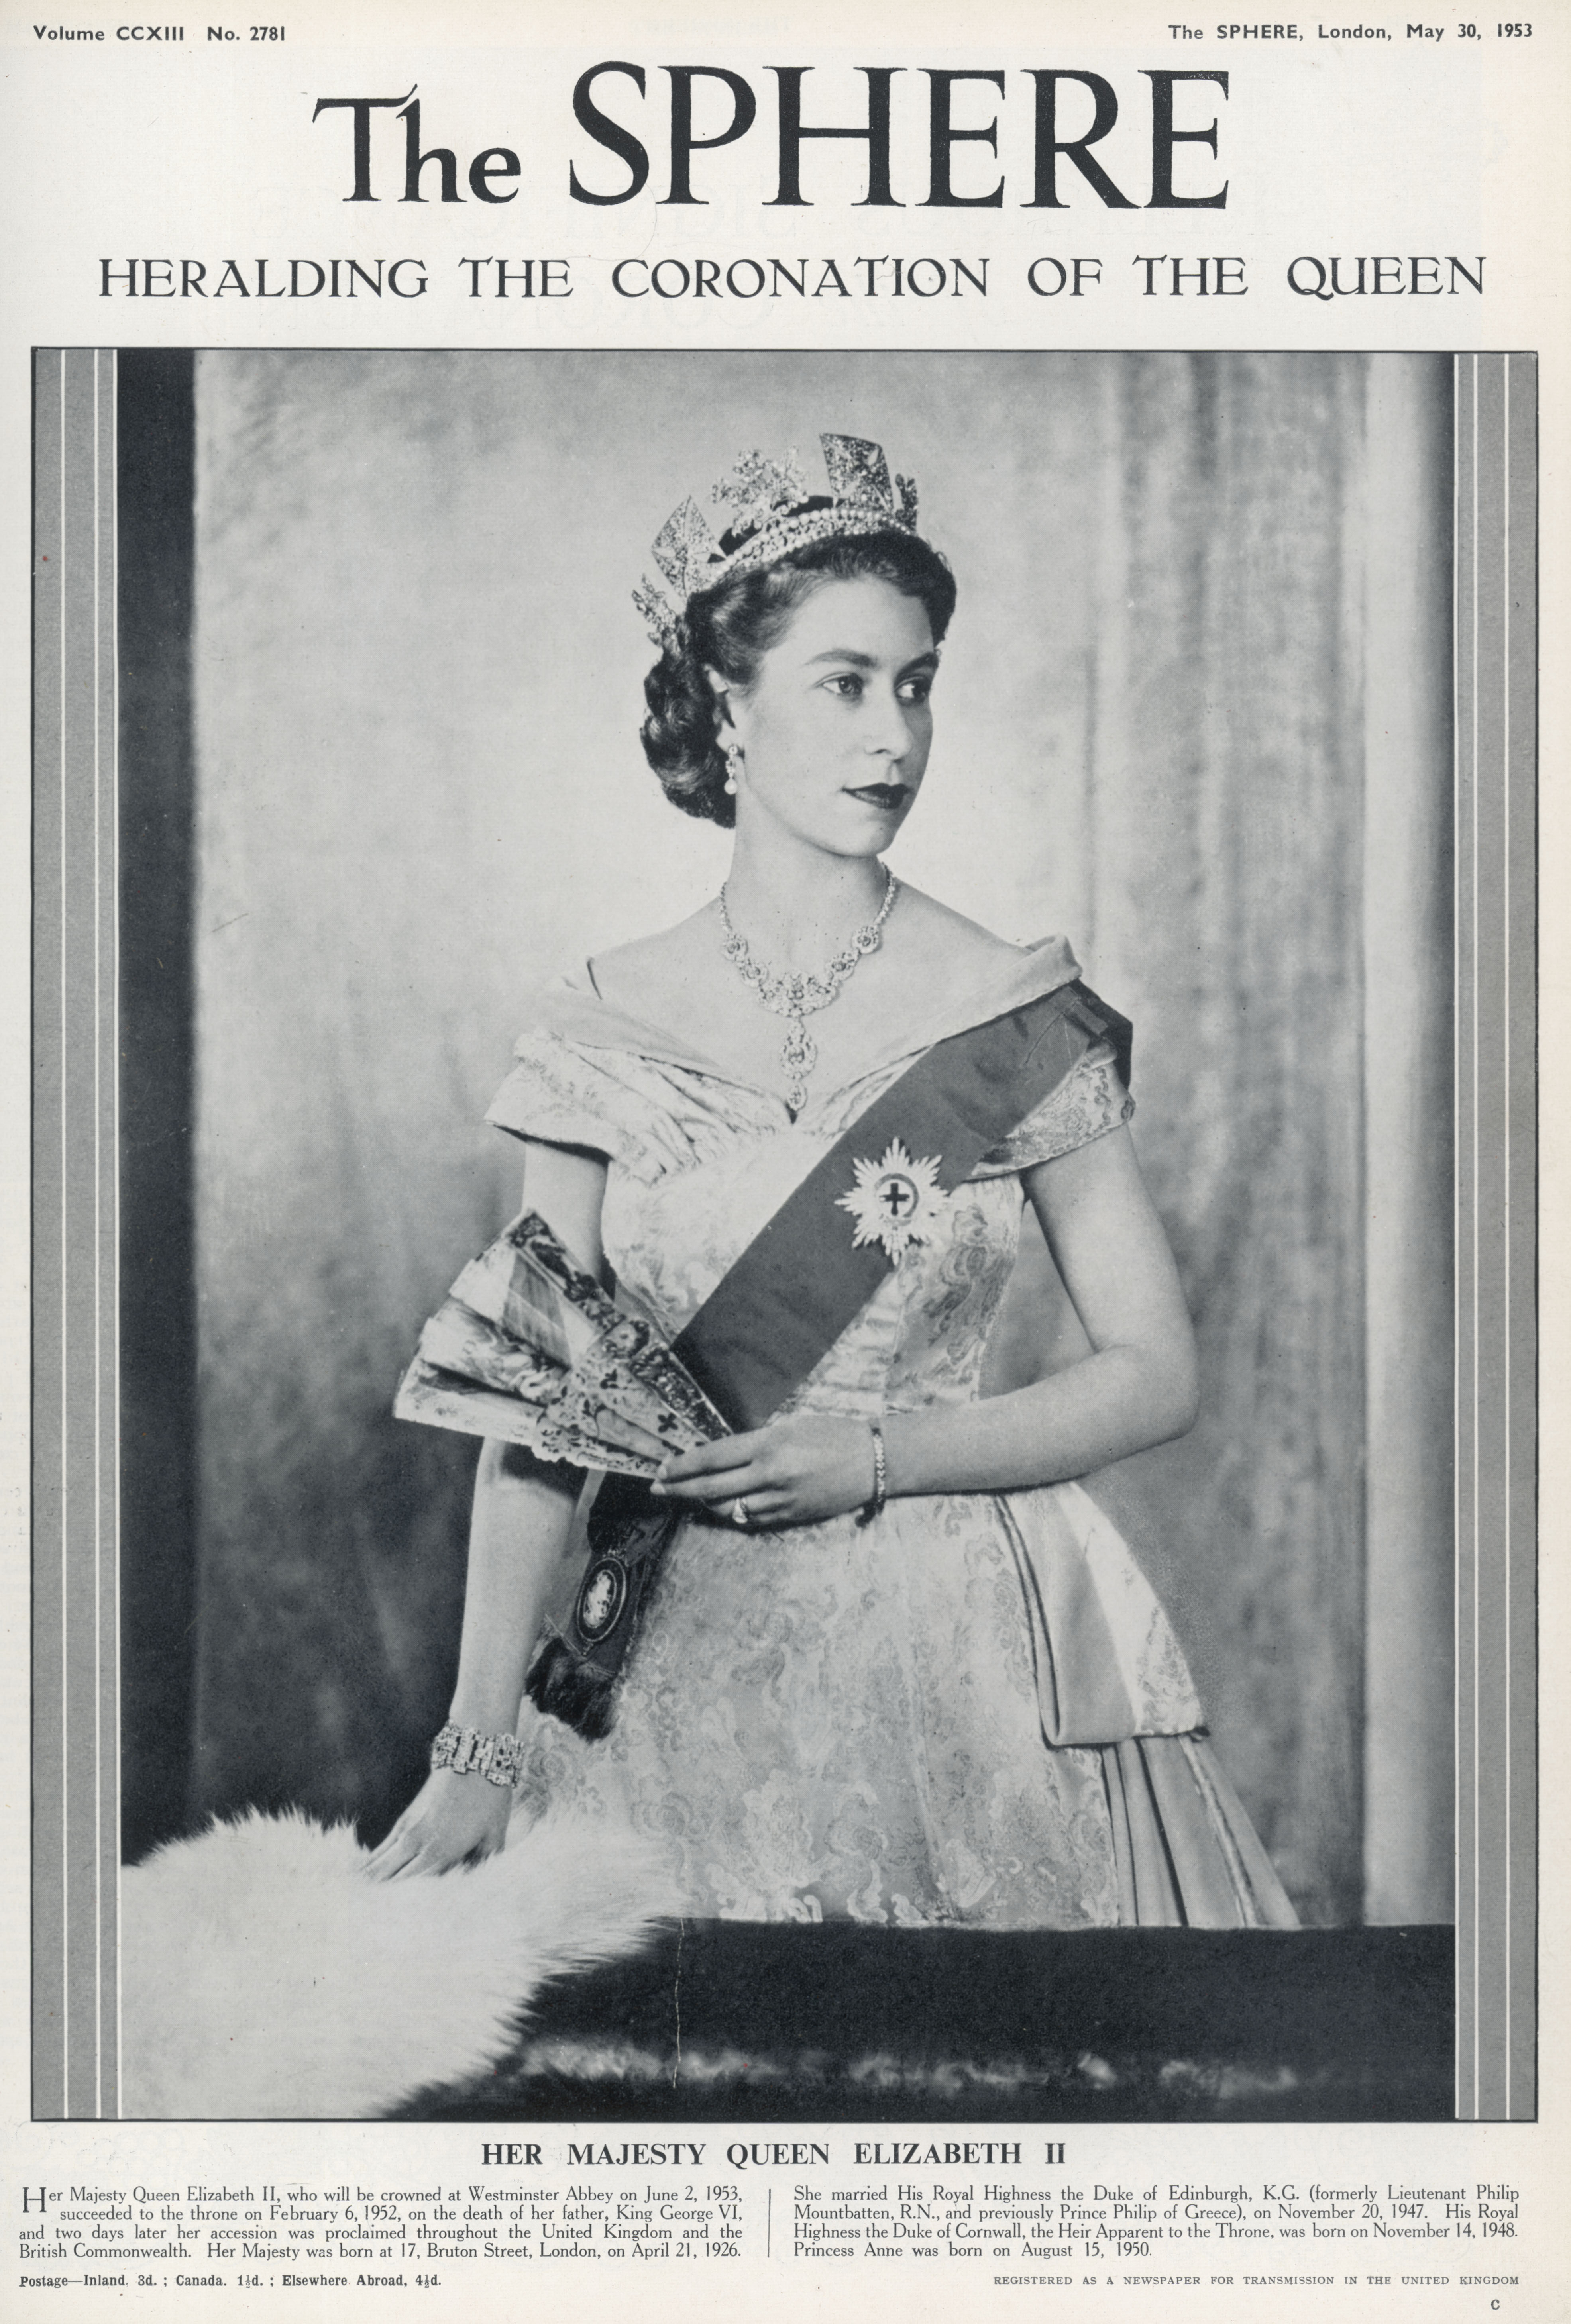 Queen Elizabeth  on the cover of The Sphere for her Coronation